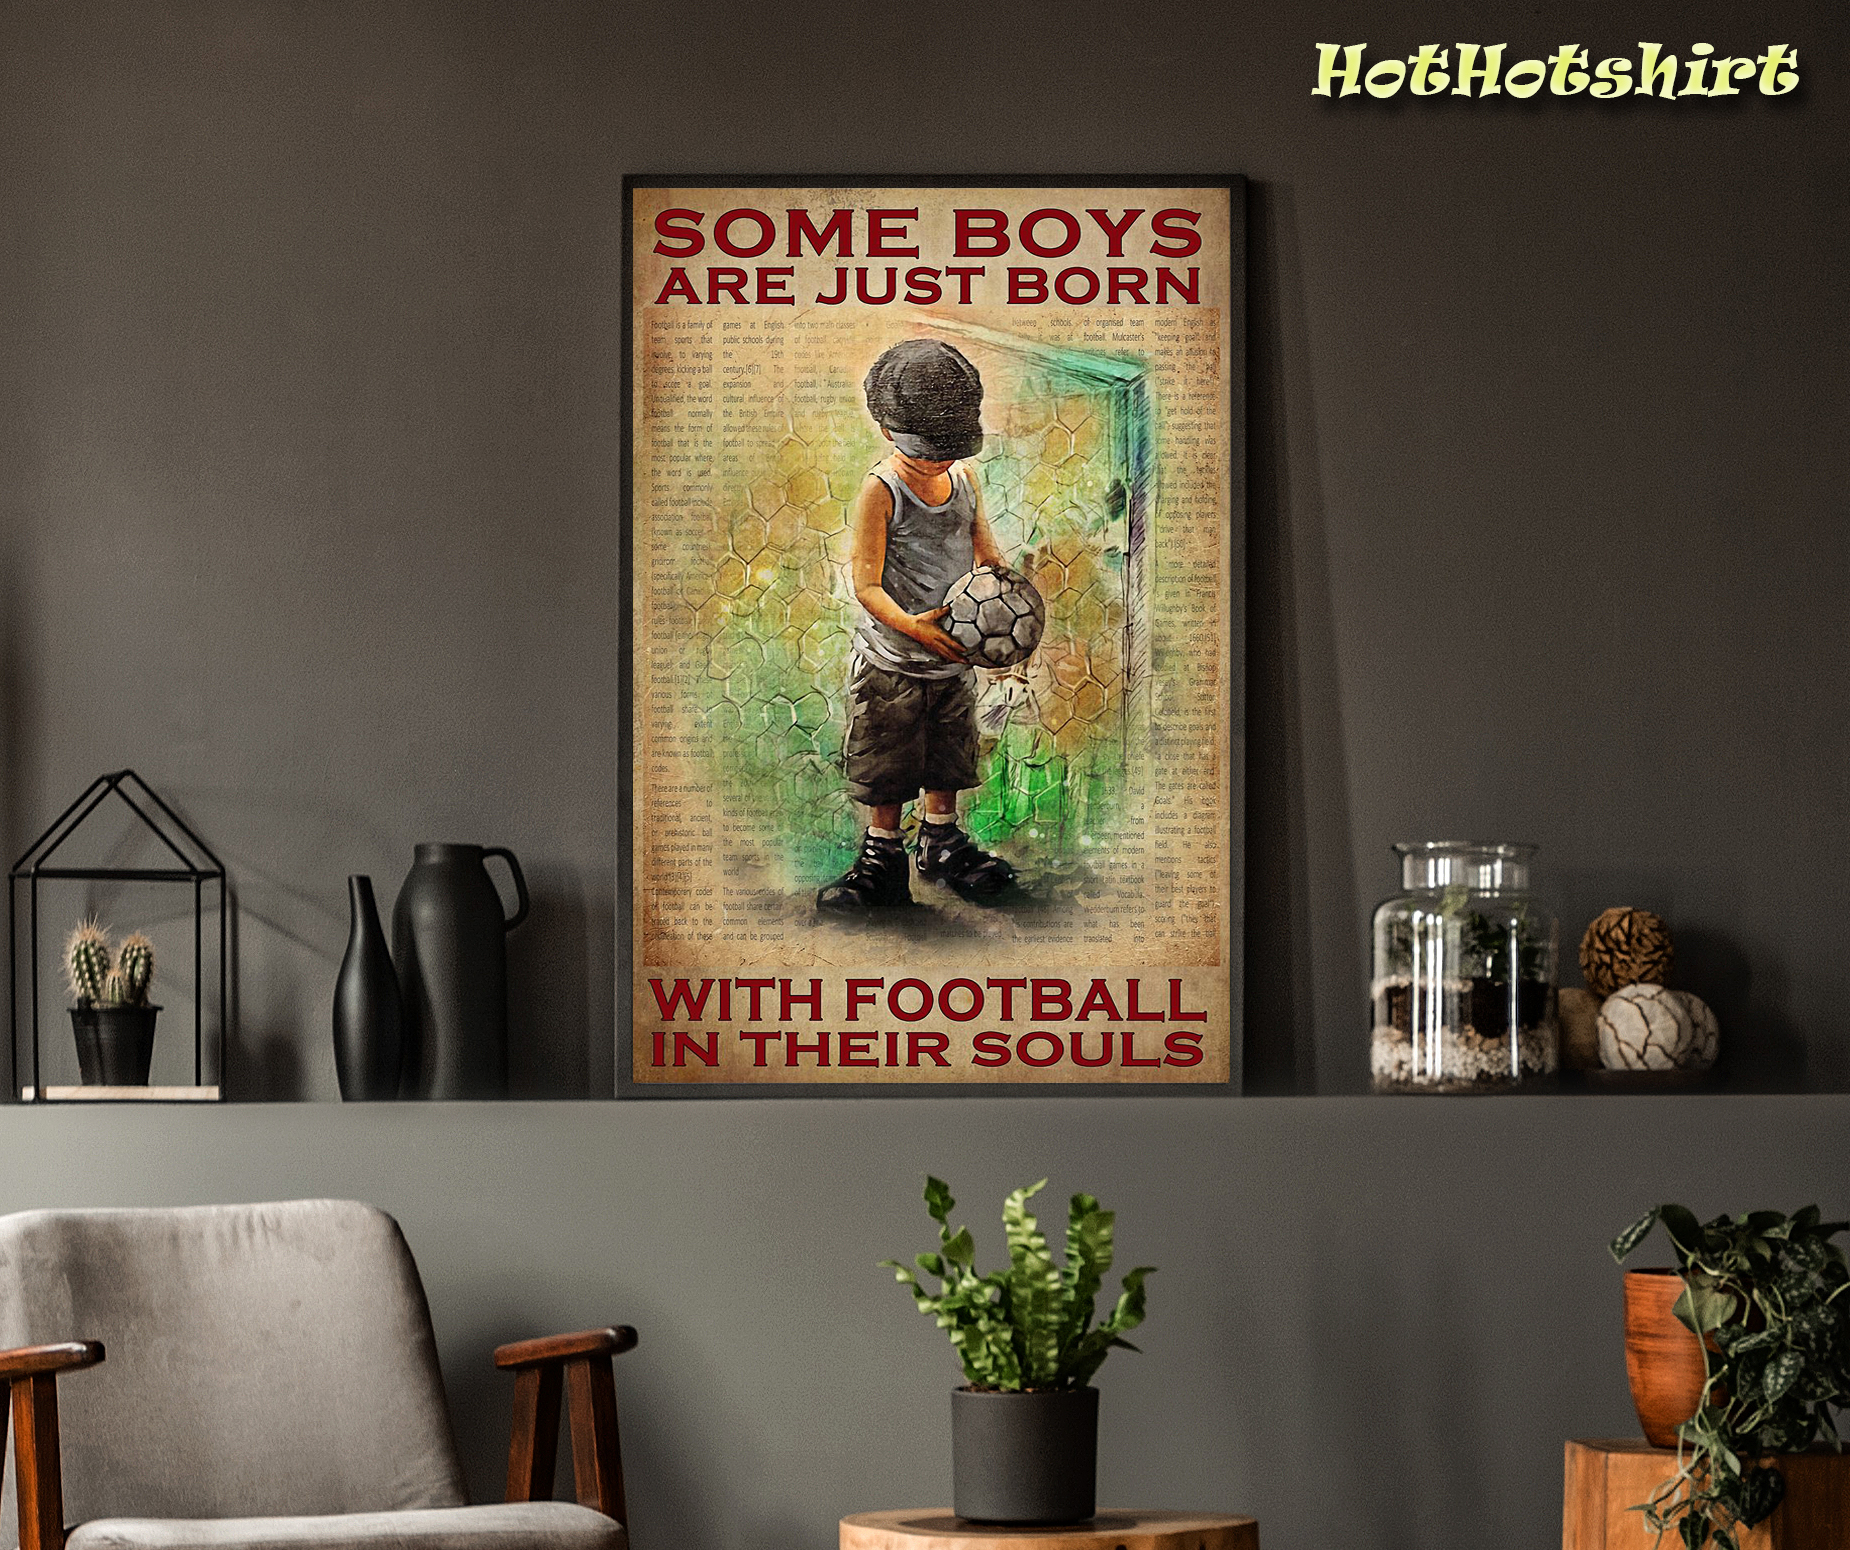 Some boys are just born with football in their souls poster